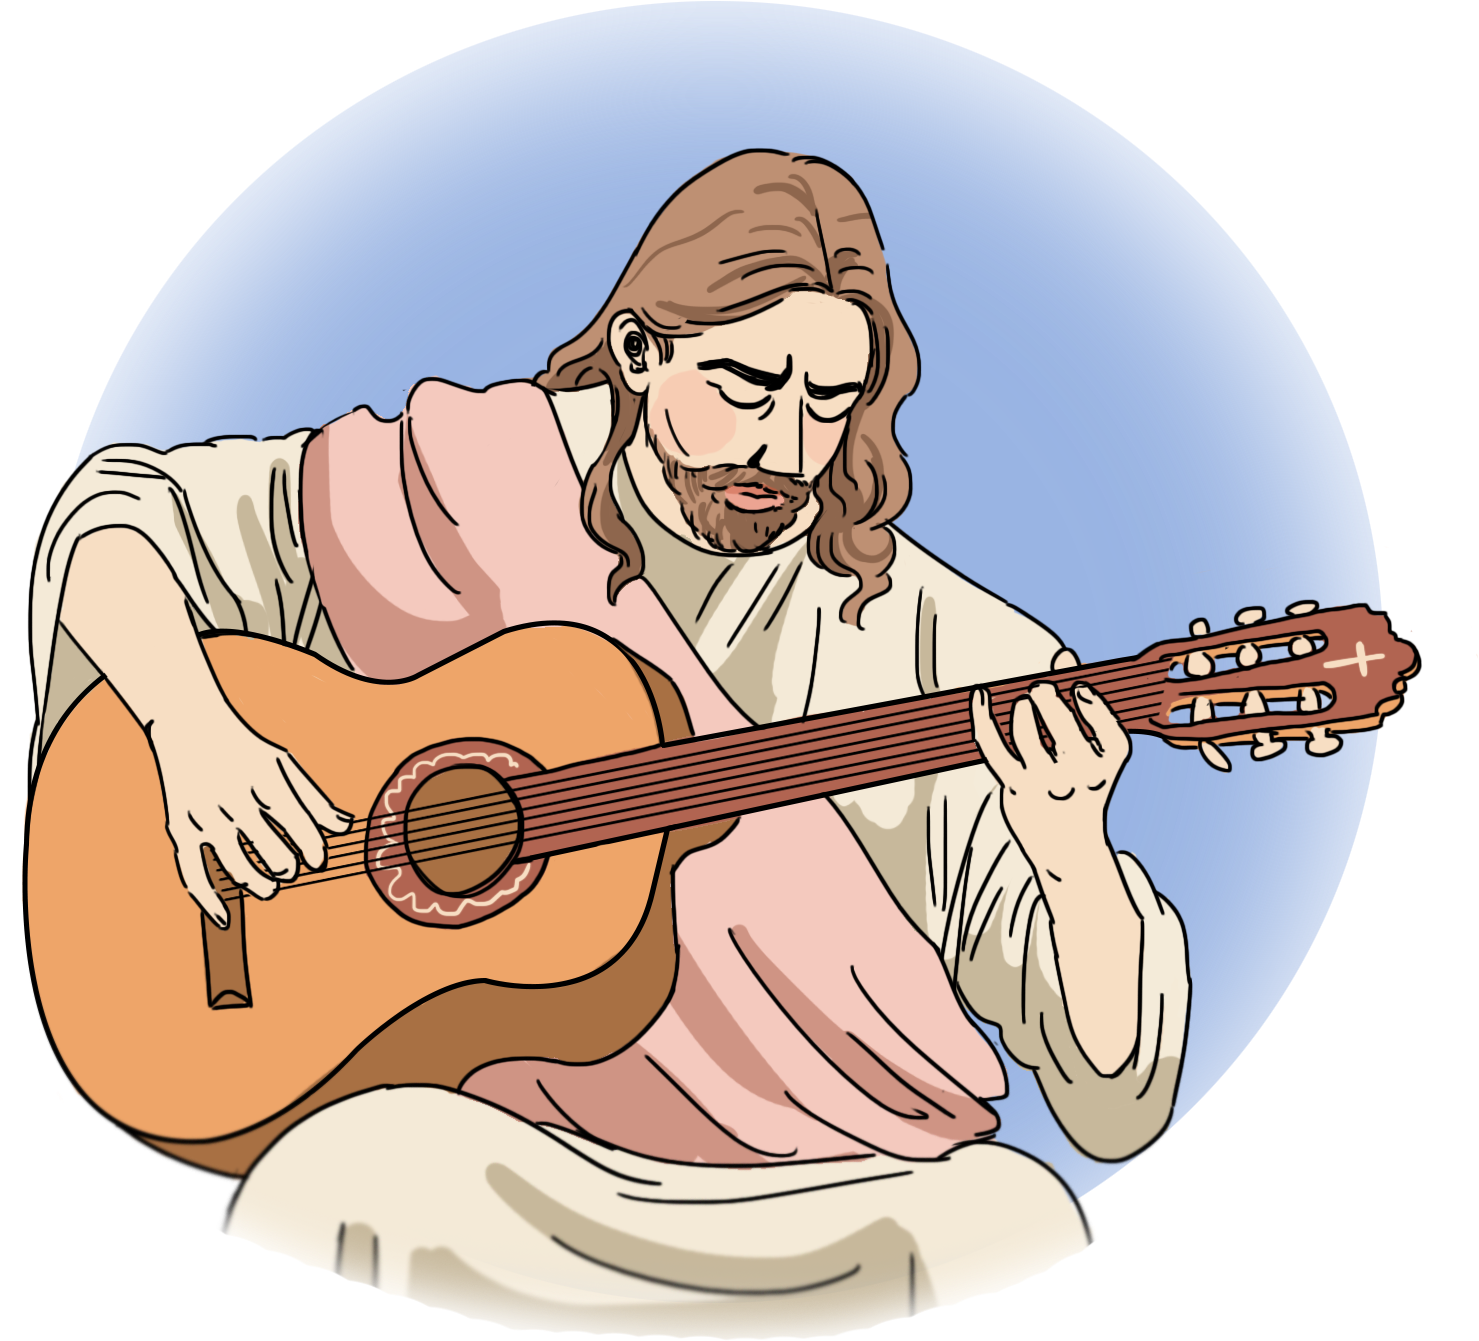 How To Write A Christian Rock Song In 5 Easy Steps - Jesus With Guitar Cartoon (1600x1480)